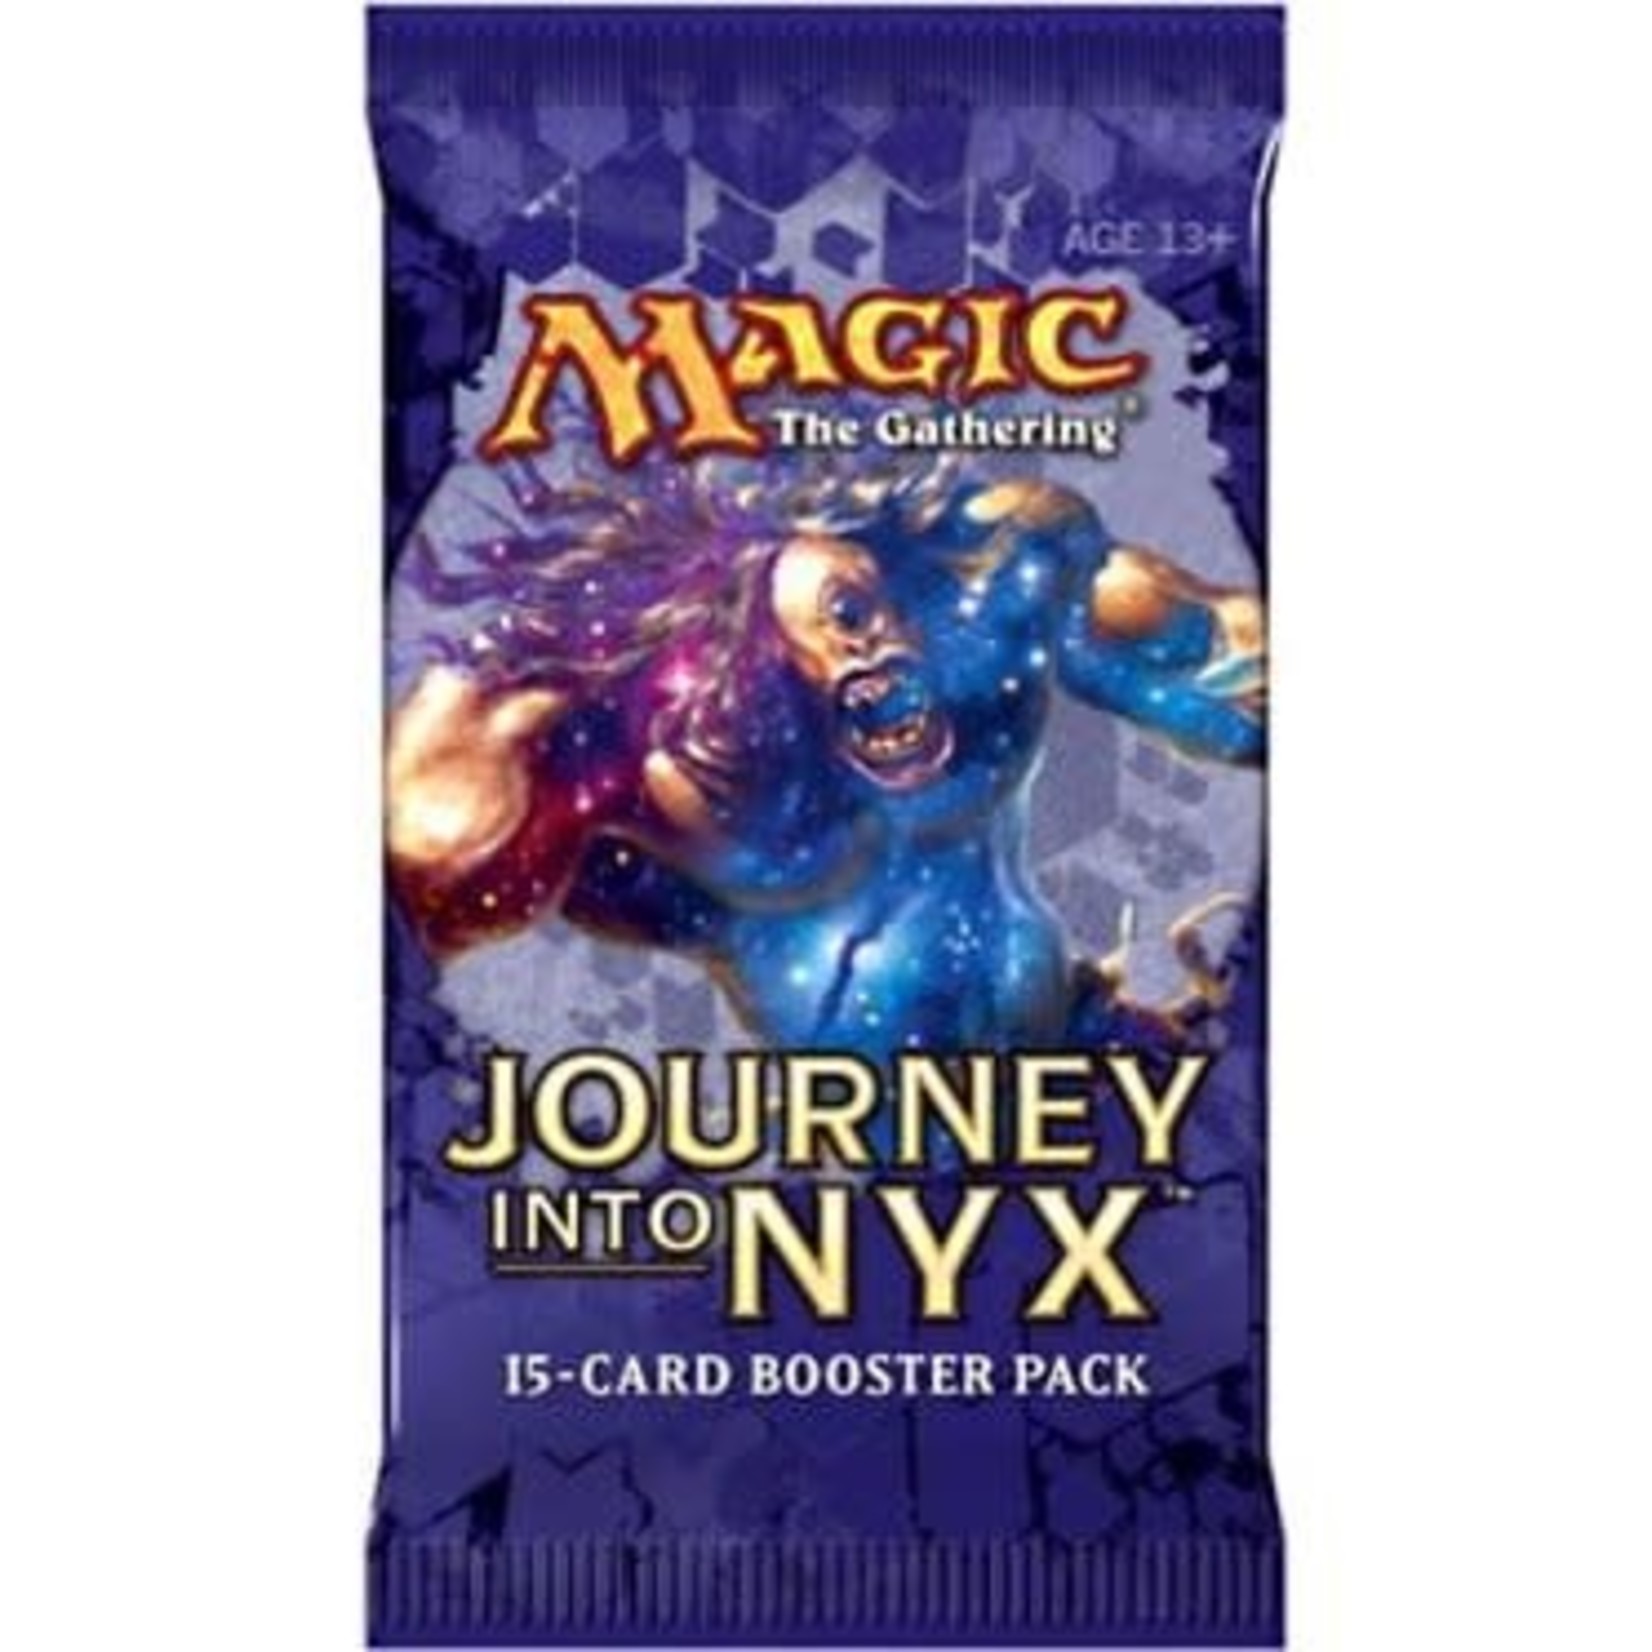 Wizards of the Coast Magic the Gathering Journey into Nyx JOU Booster Pack